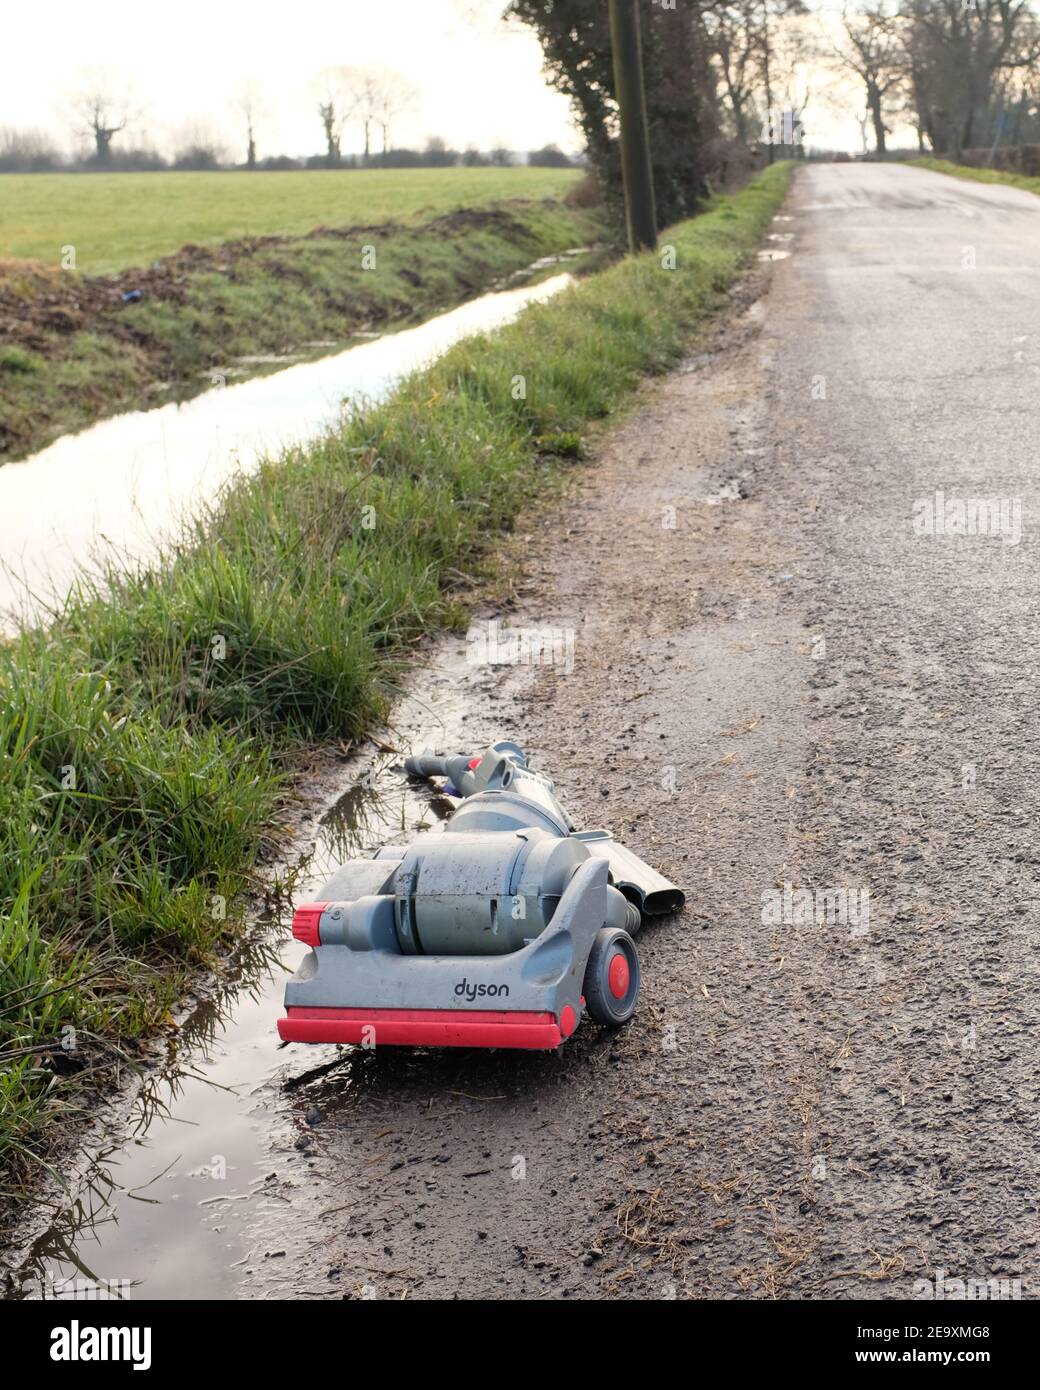 February 2021 - Busted Dyson plastic vacuum cleaner dumped on the roadside  in rural Somerset, England, UK Stock Photo - Alamy